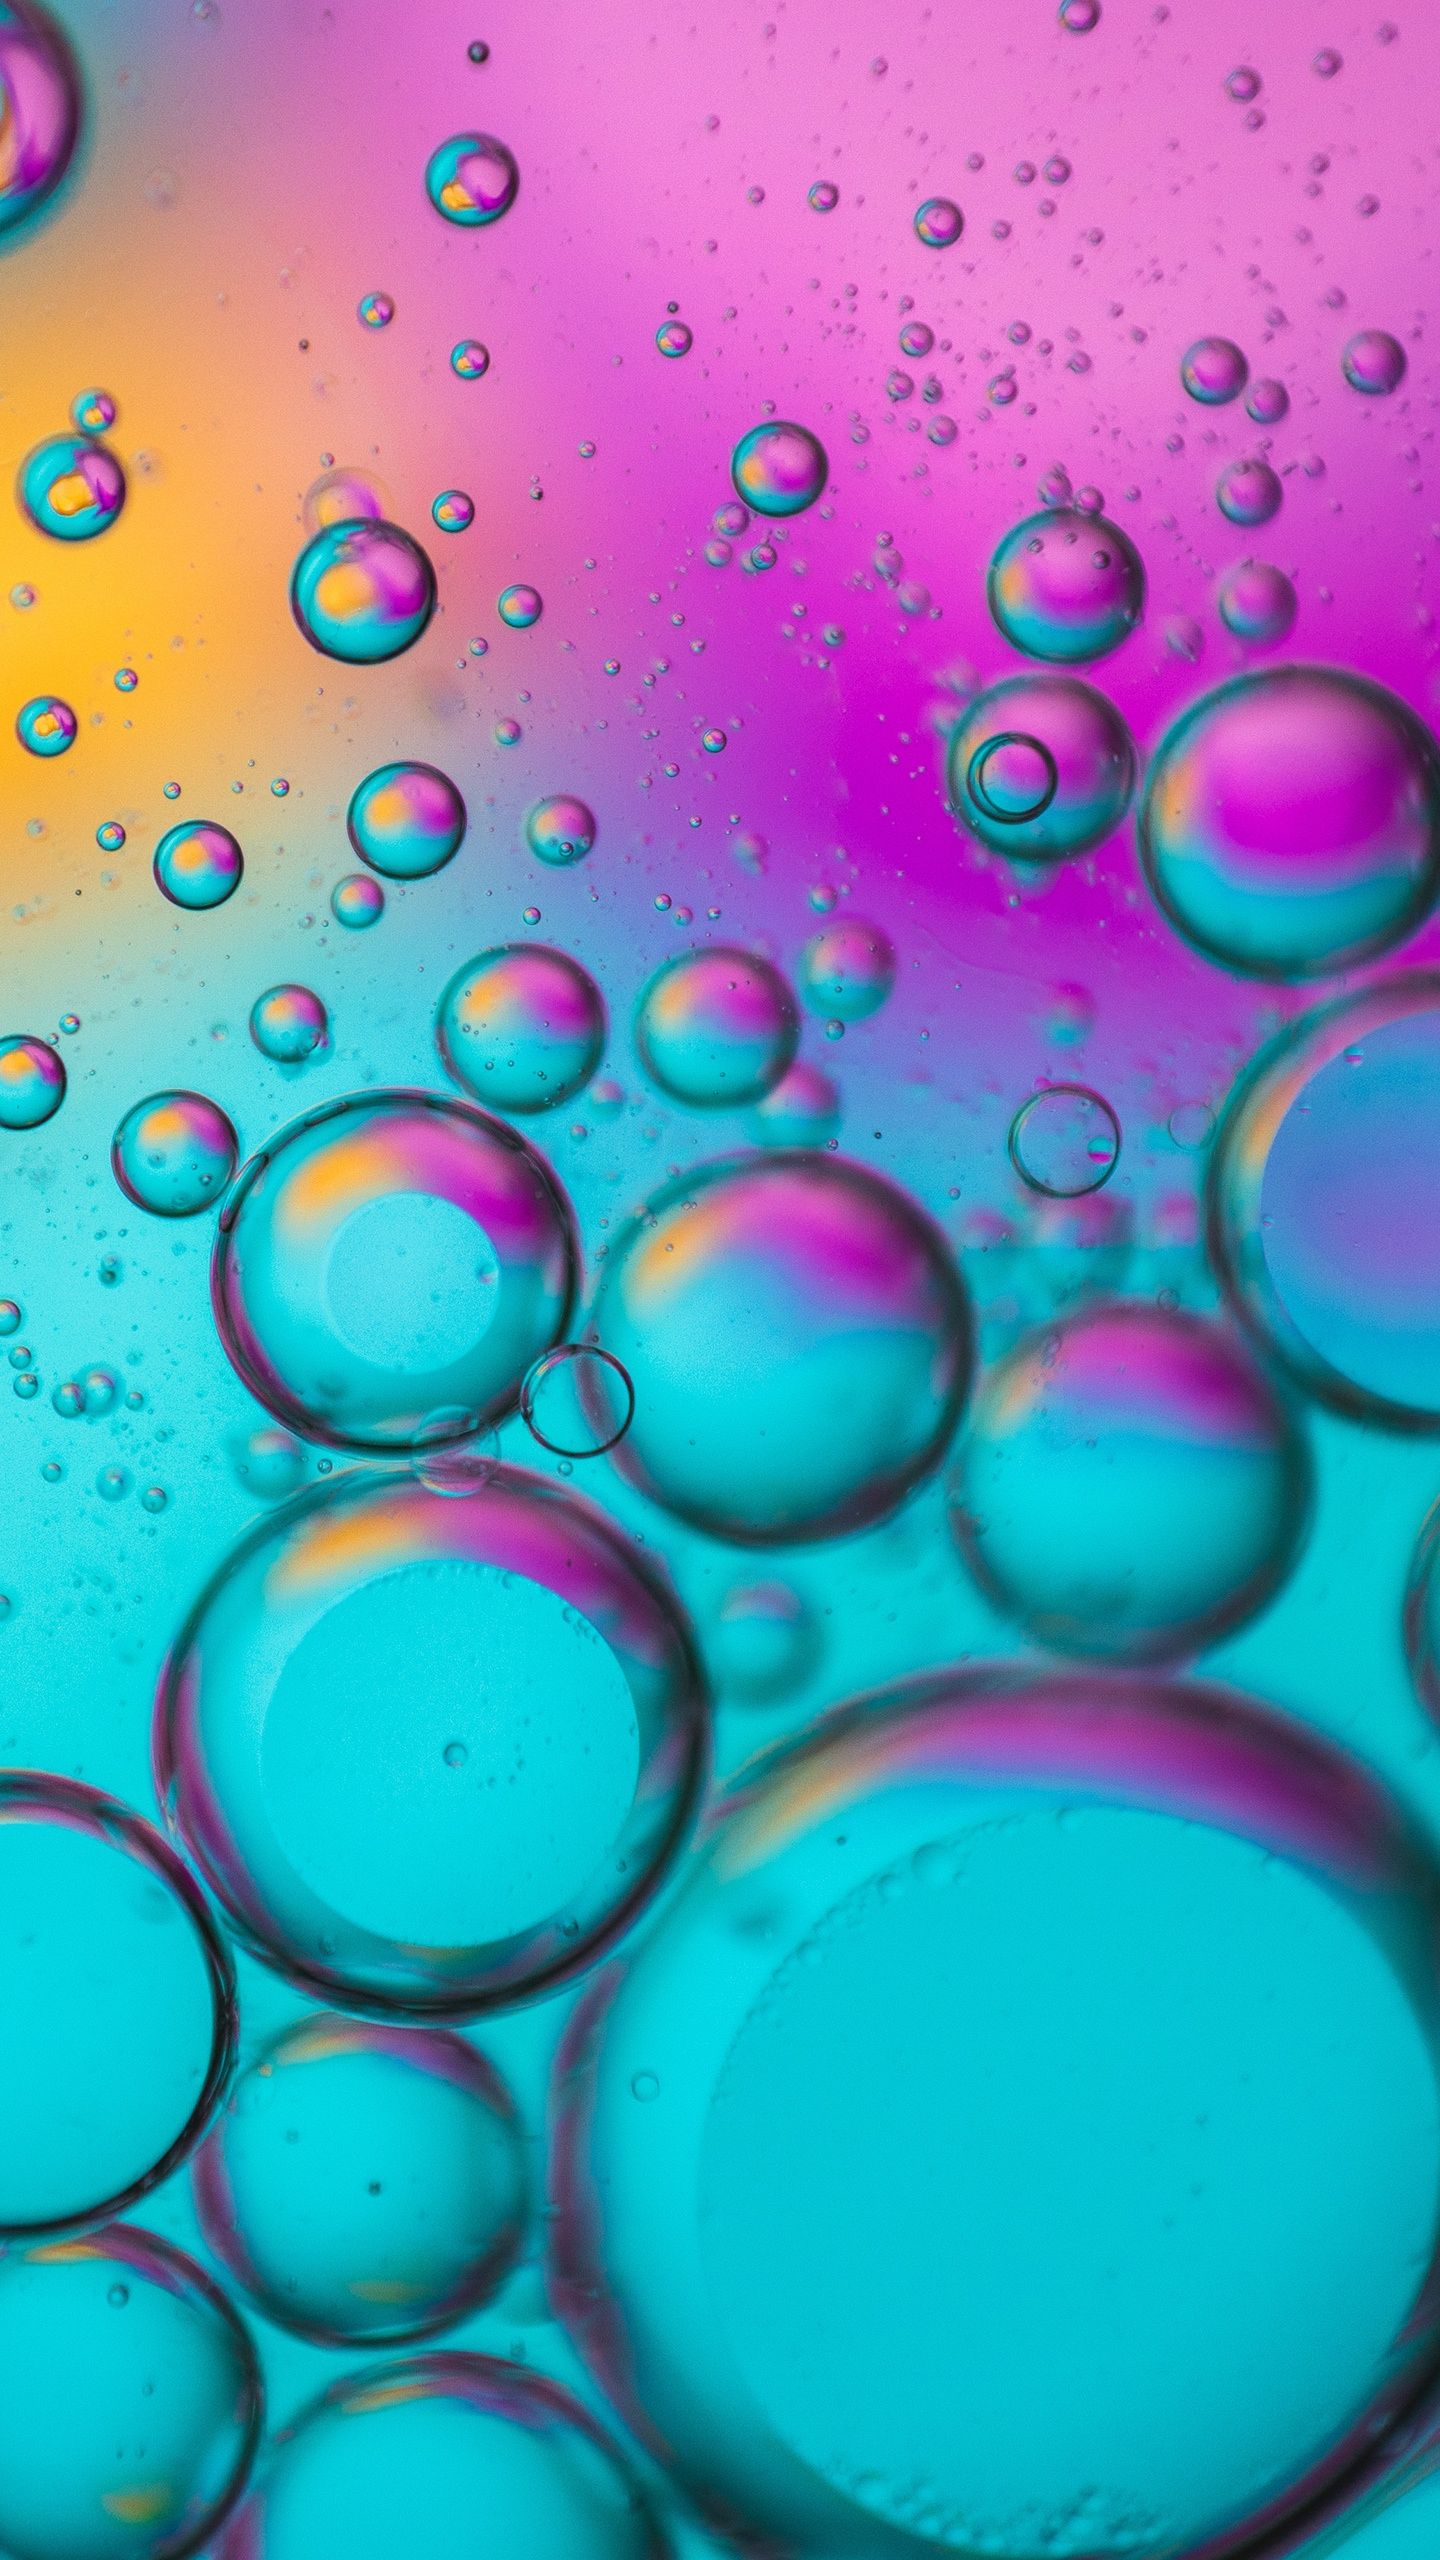 A close up of some bubbles in water - Turquoise